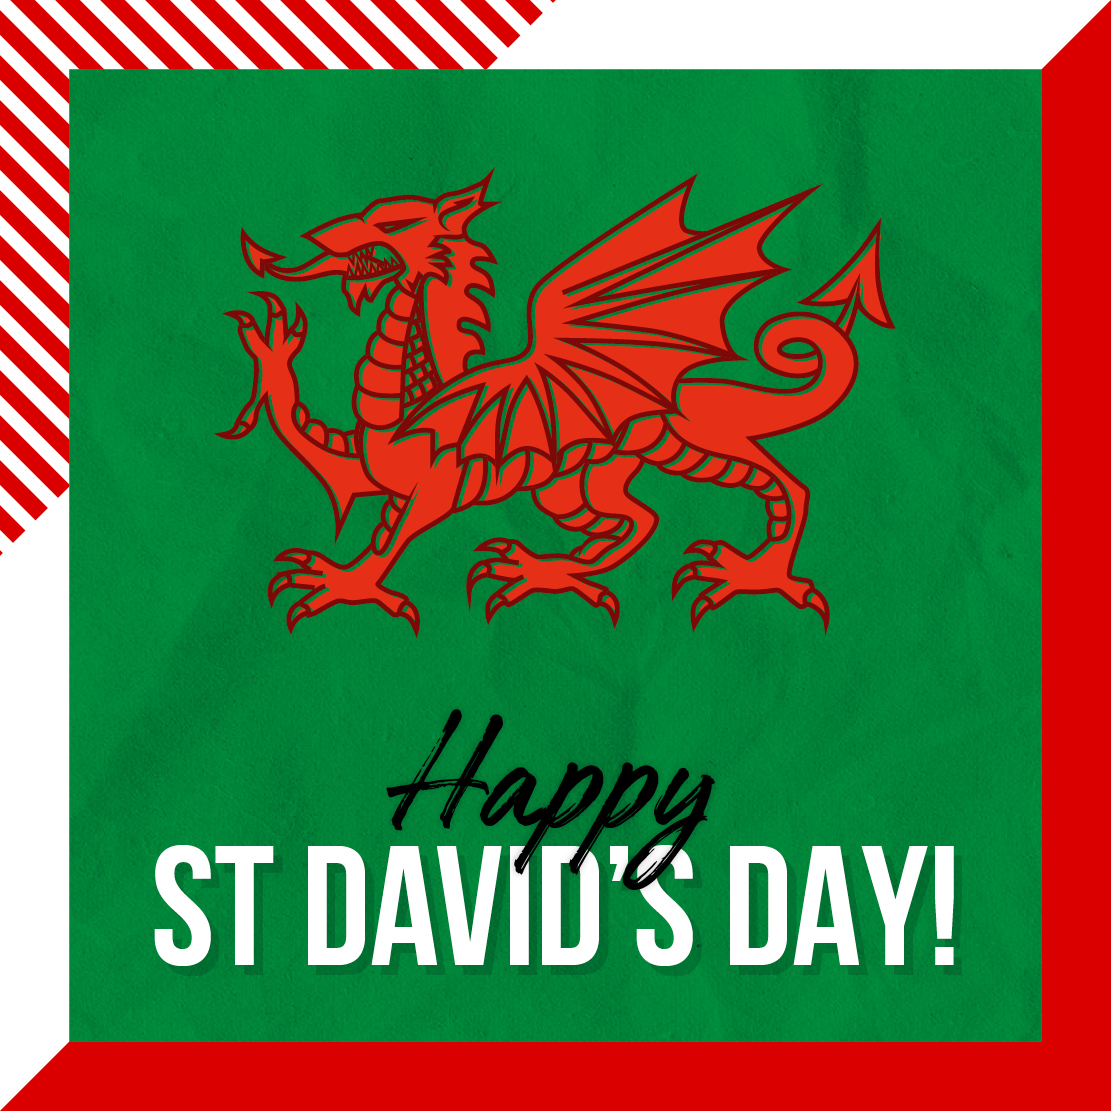 Dydd Gŵyl Dewi Hapus!

From all our team here at Prime Student Living, we would like to wish you all a Happy St David's Day.

#stdavidsday #primestudentliving #studentlivingatitsbest